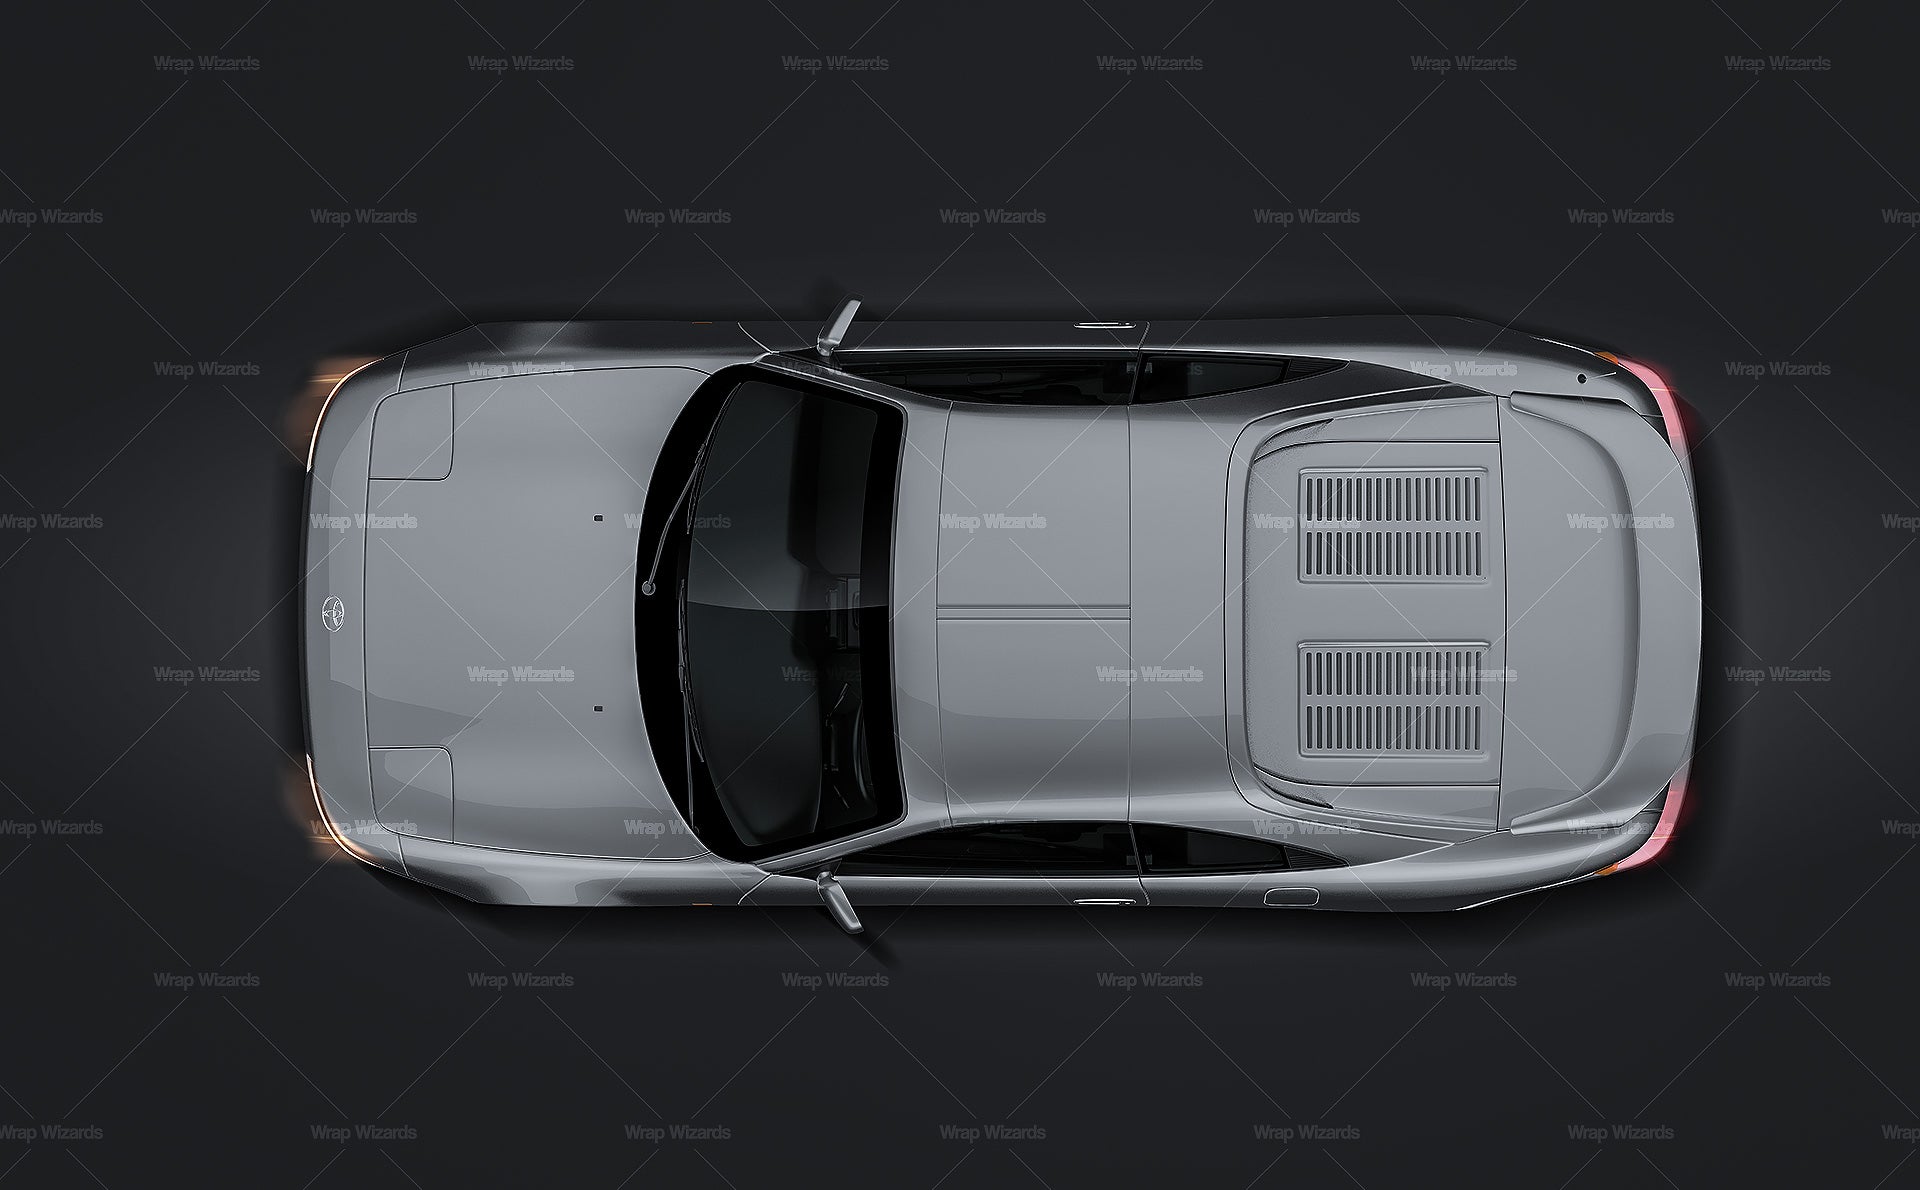 Toyota MR2 SW20 glossy finish - all sides Car Mockup Template.psd